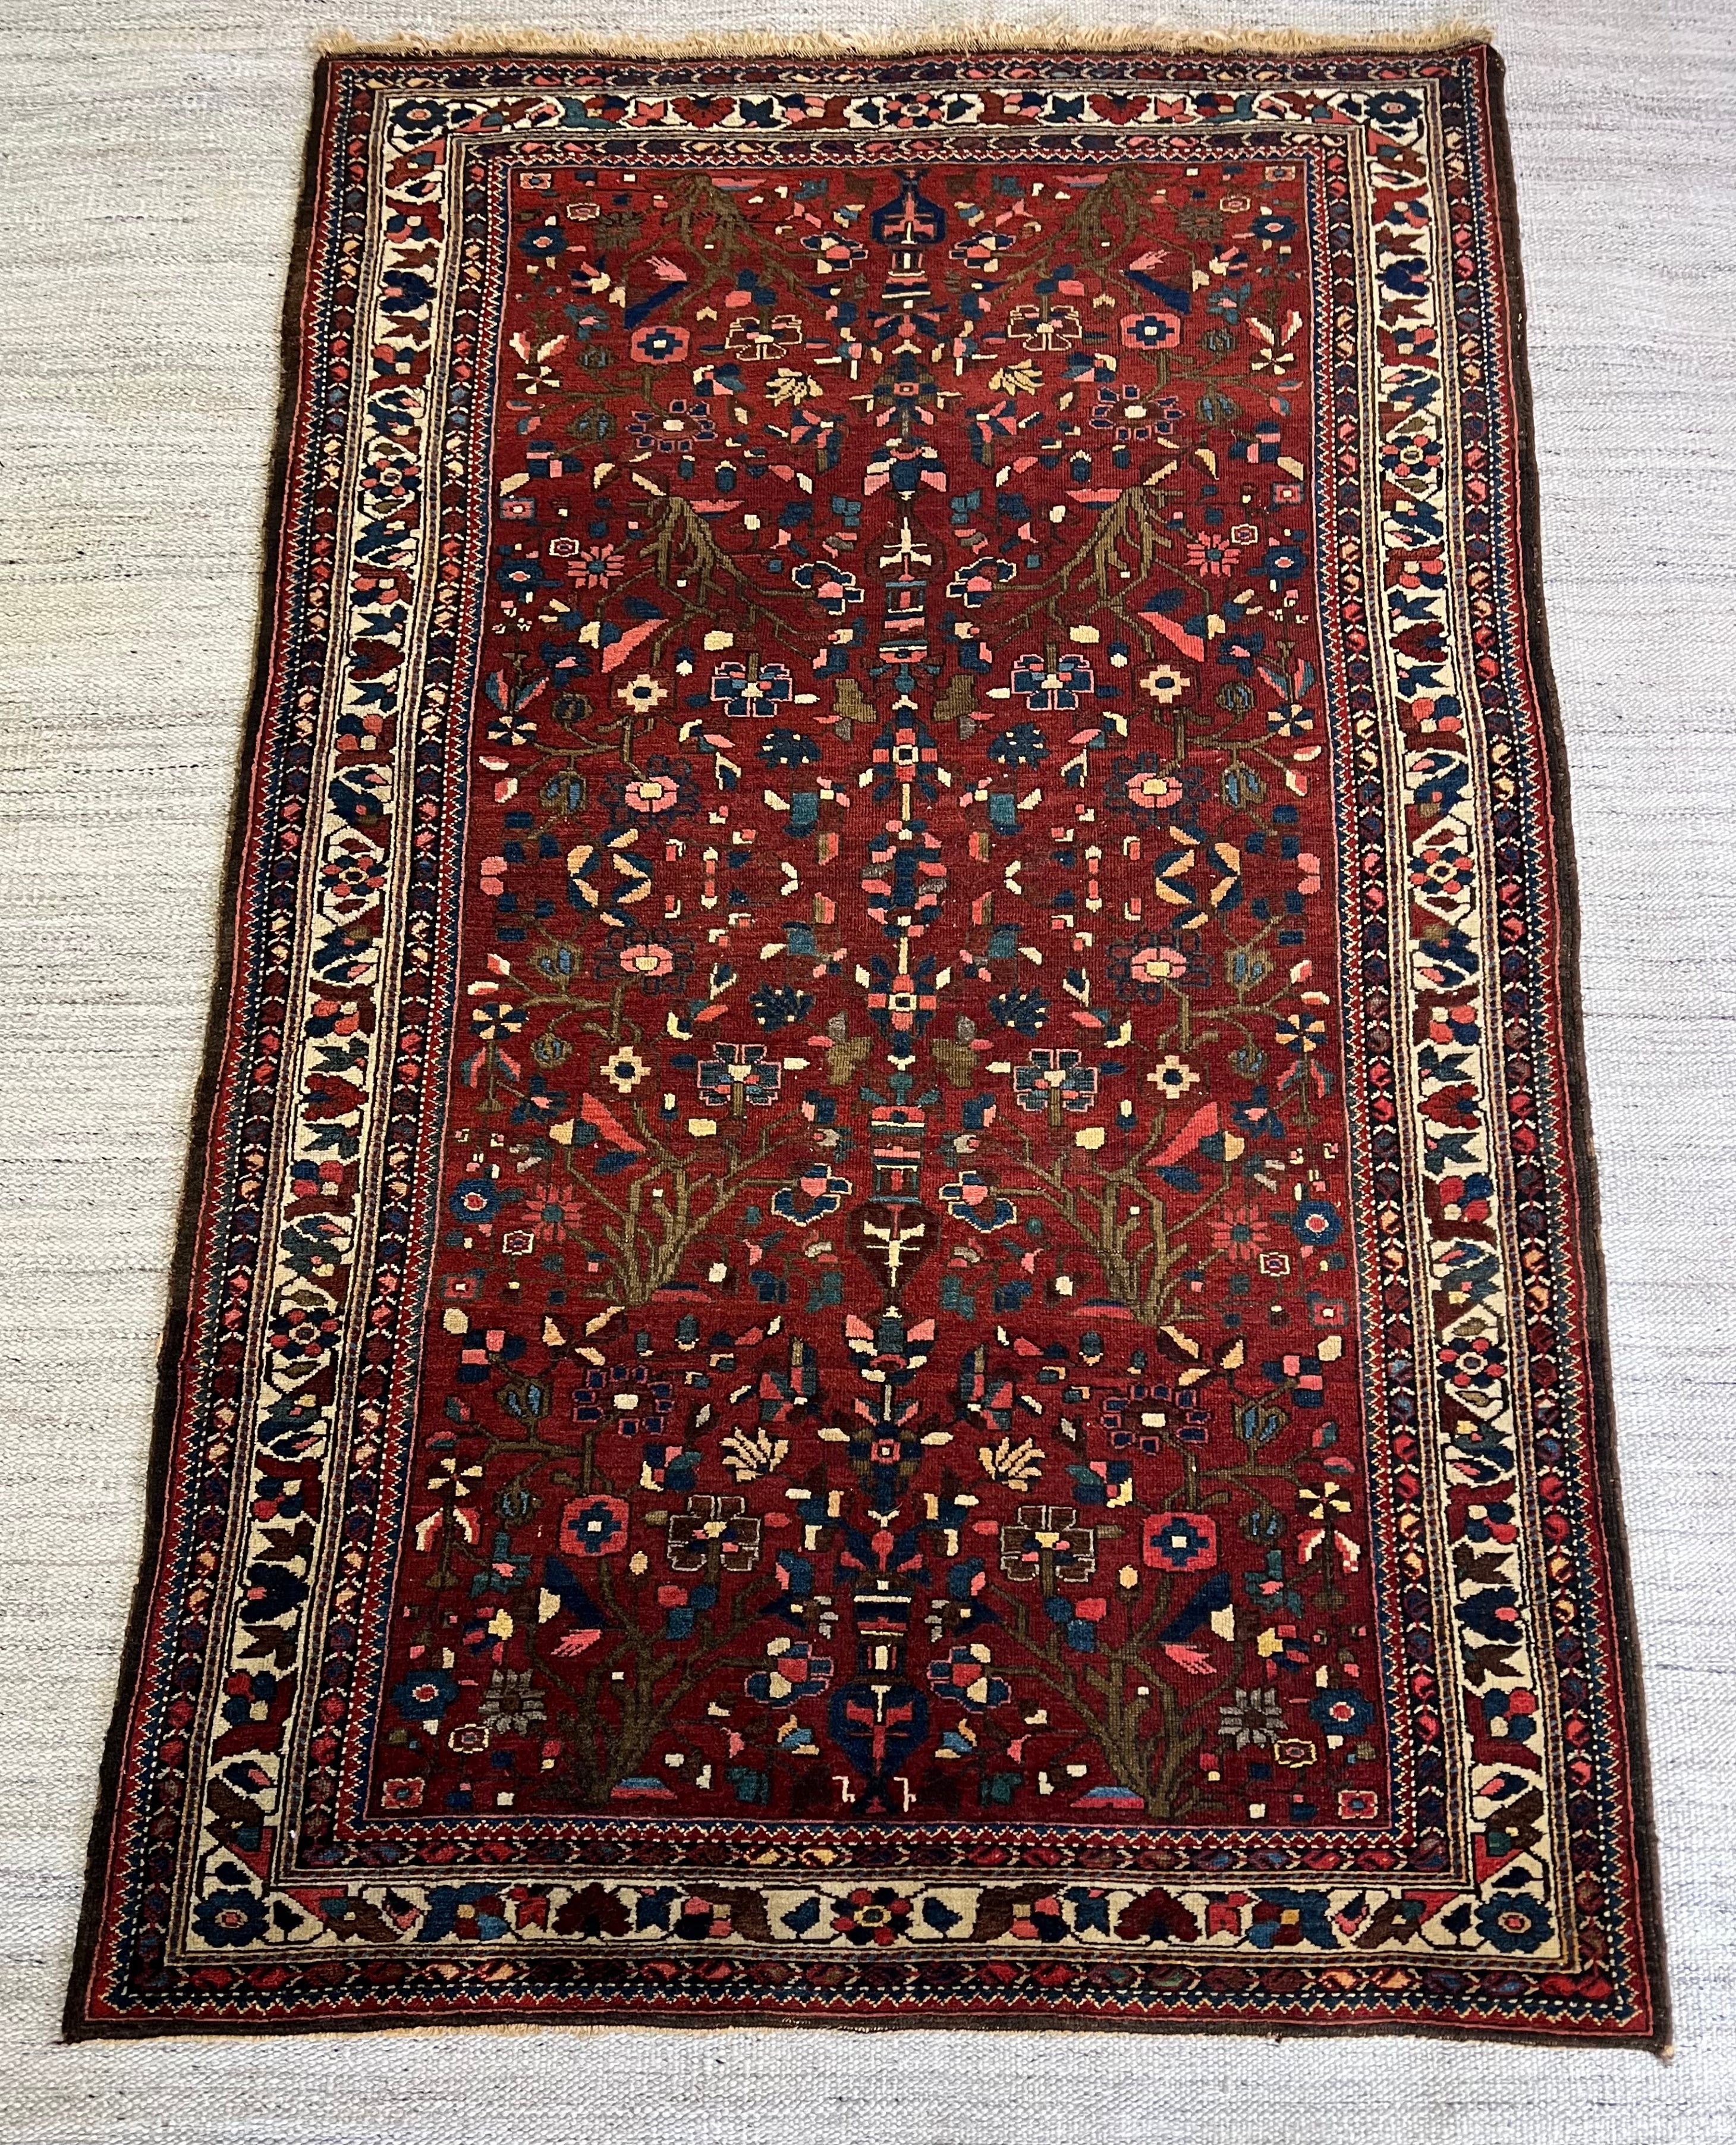 Fine Antique 4.6x7.1 Southwest Persian Bakhtiari Rug Red and Blue